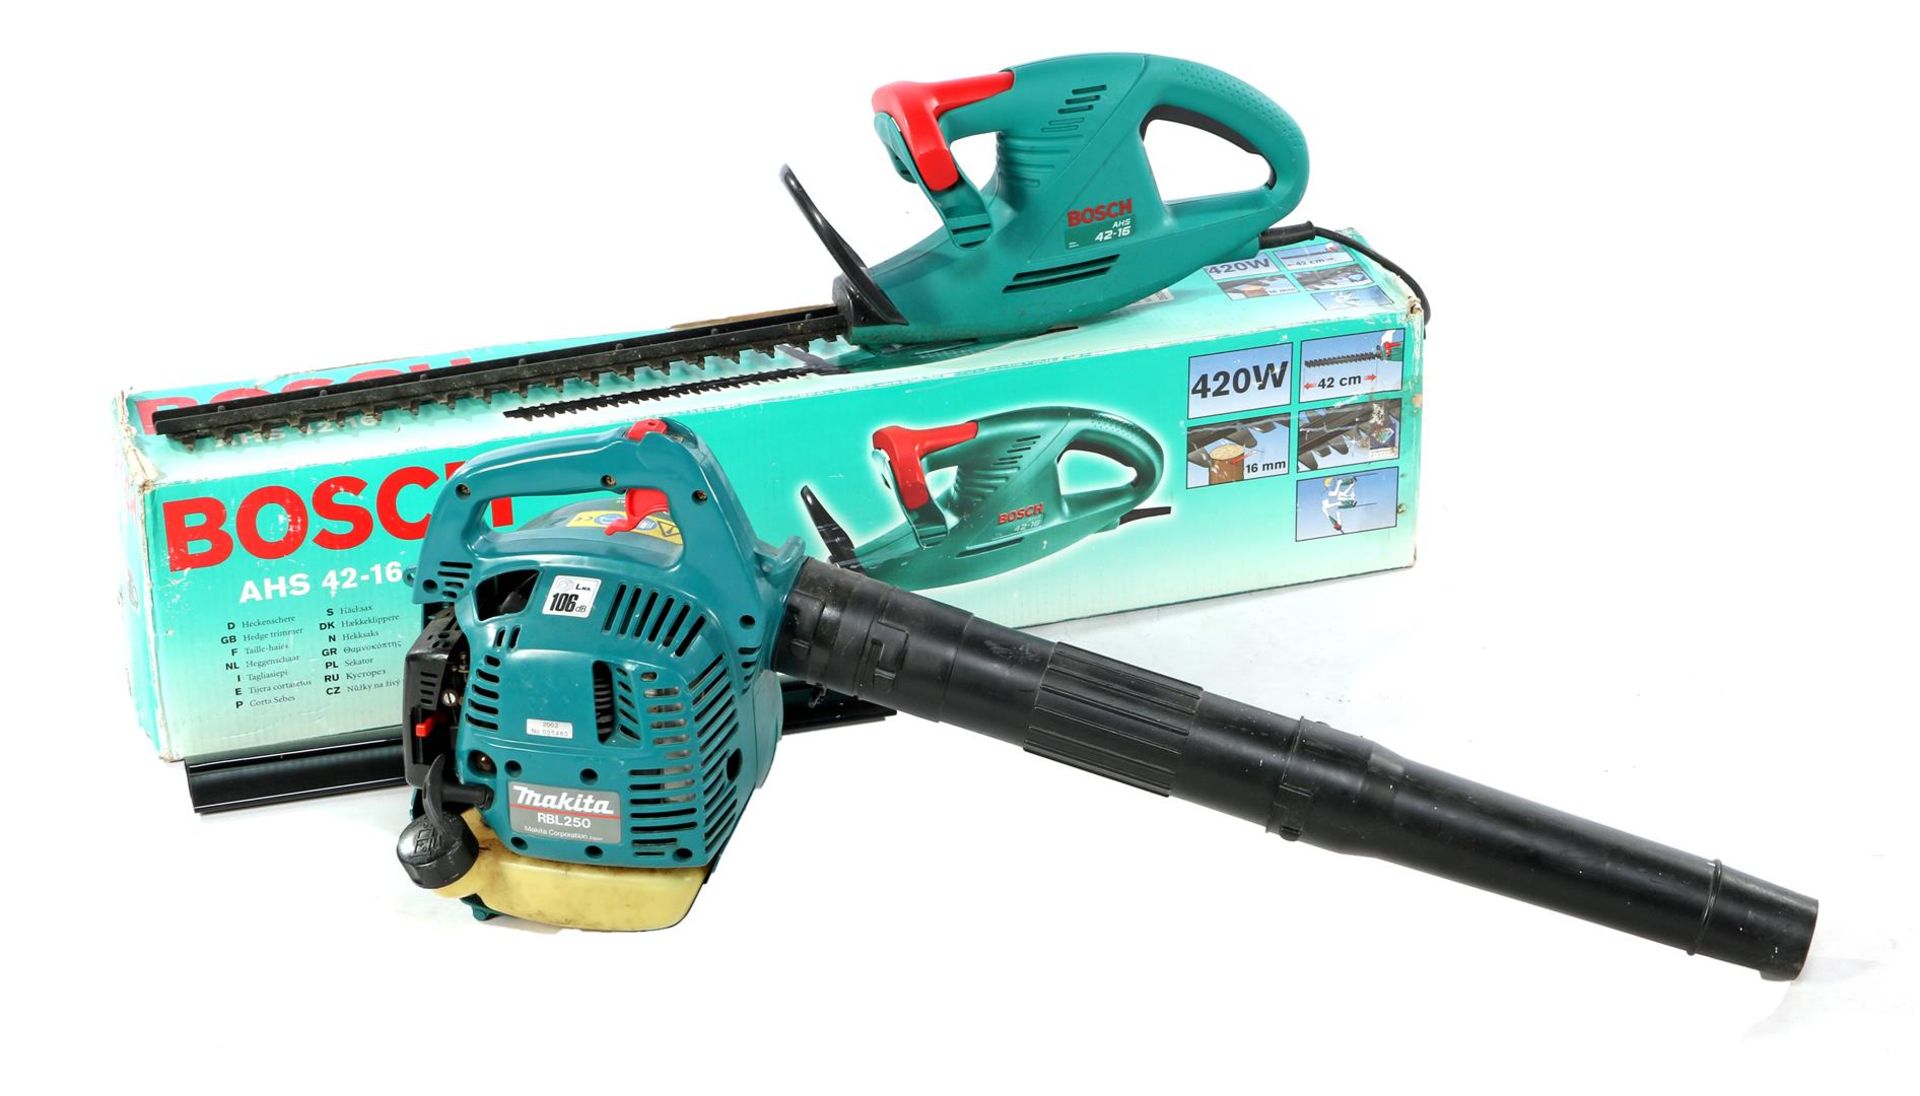 Makita leaf blower and Bosch hedge trimmer